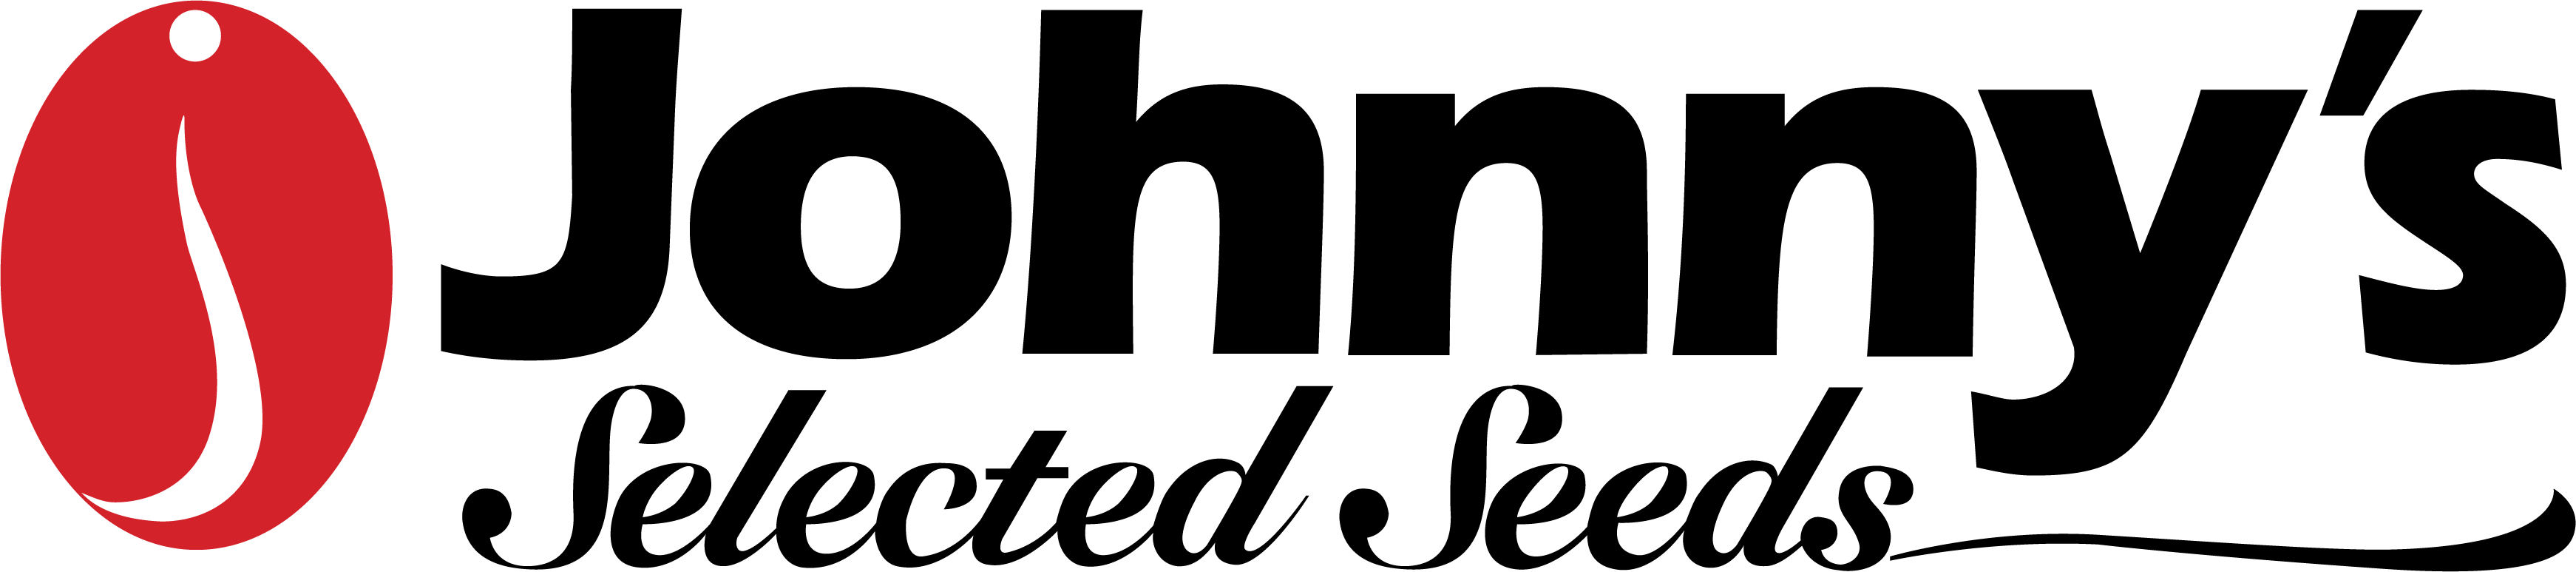 How Johnny's Selected Seeds improved its ecommerce experience. -  Salesforce.com